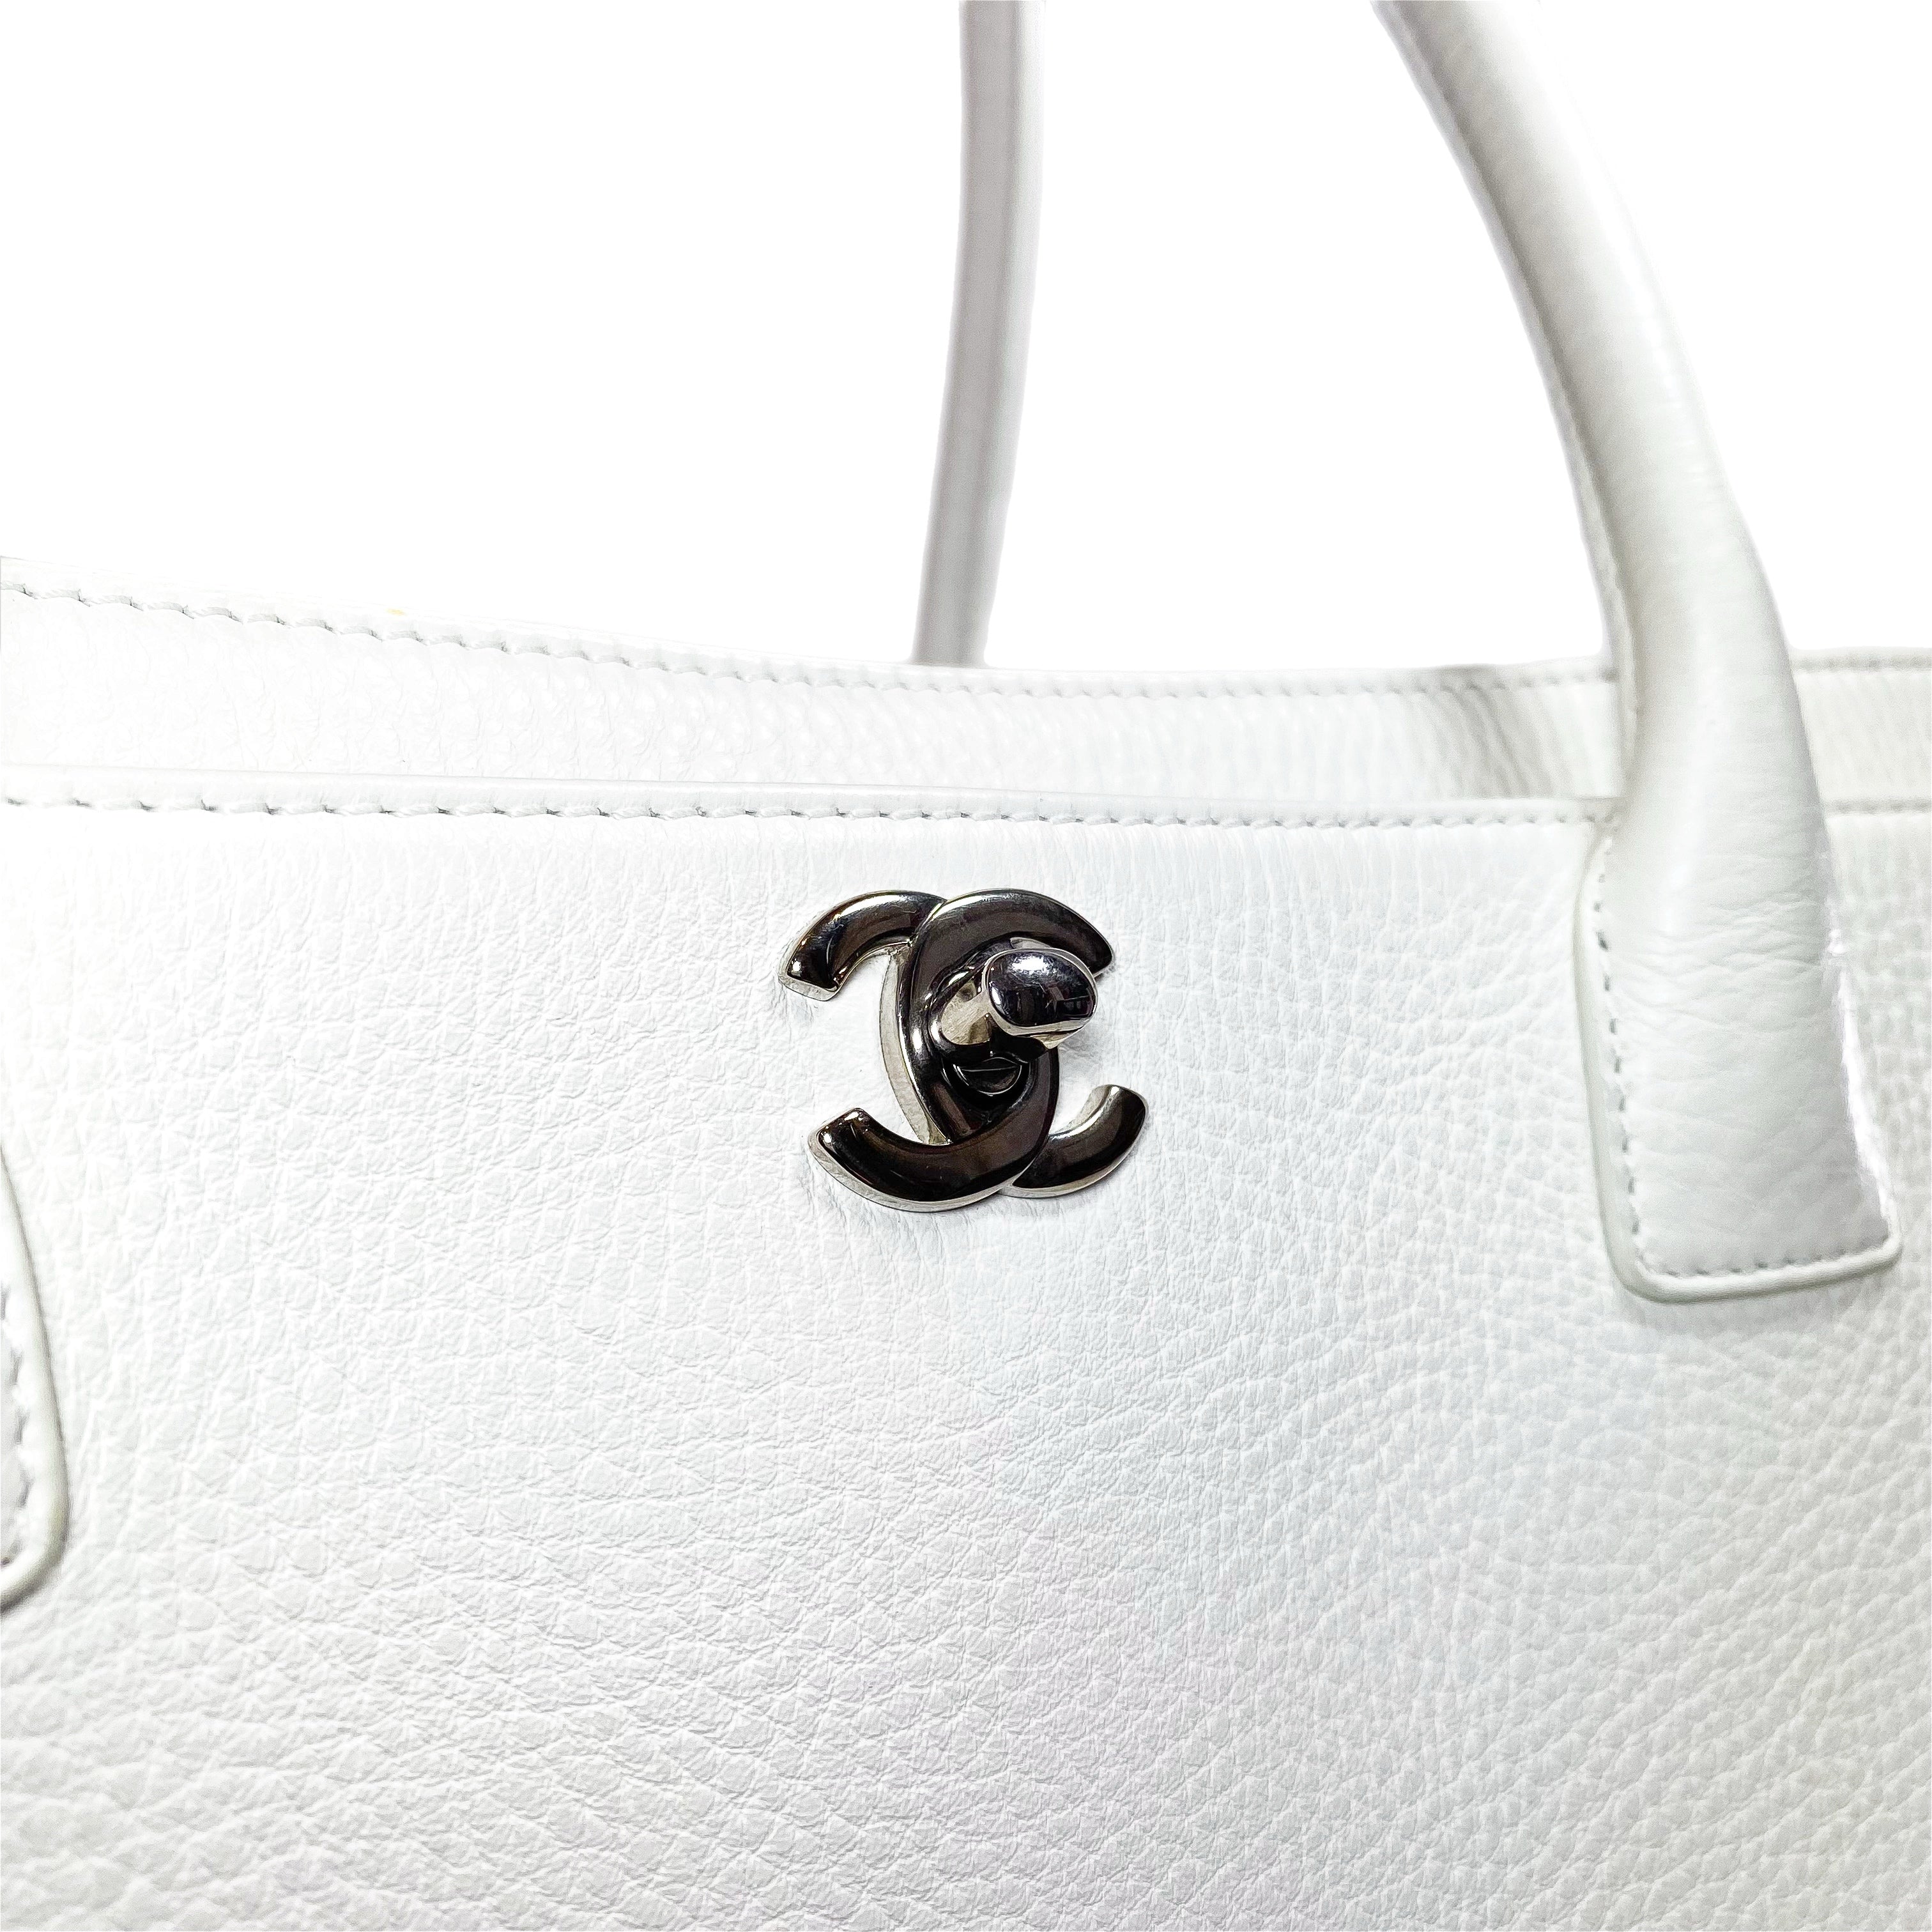 Chanel White Executive Cerf Tote Bag